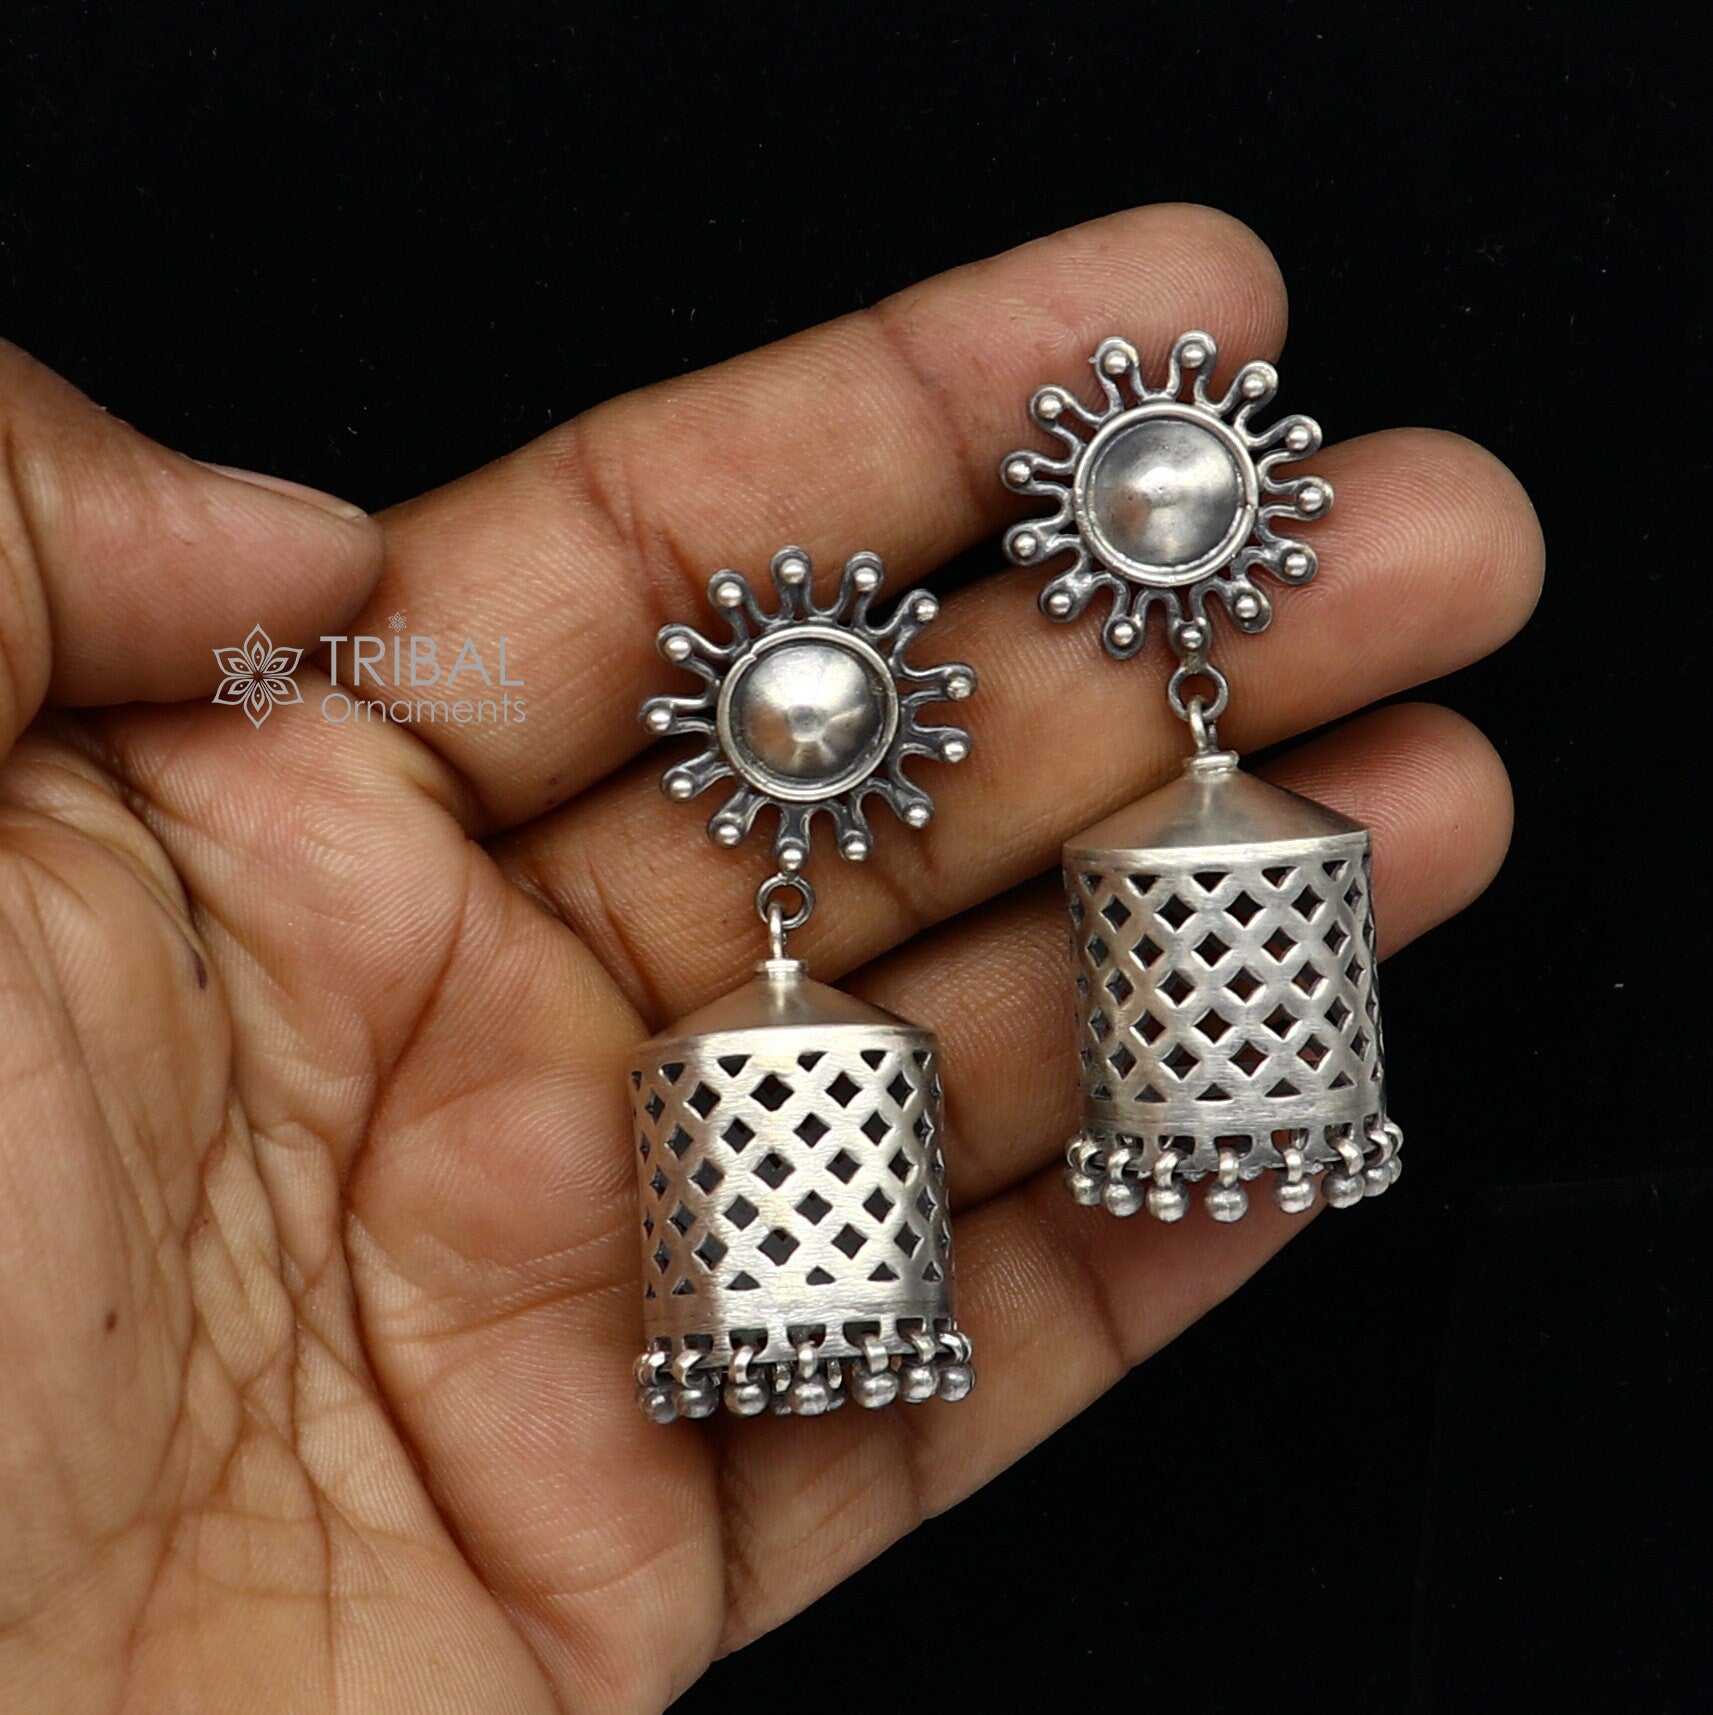 925 Sterling silver handmade traditional cultural design drop dangler jhumka earrings, best party functional Navratri jewelry s1236 - TRIBAL ORNAMENTS